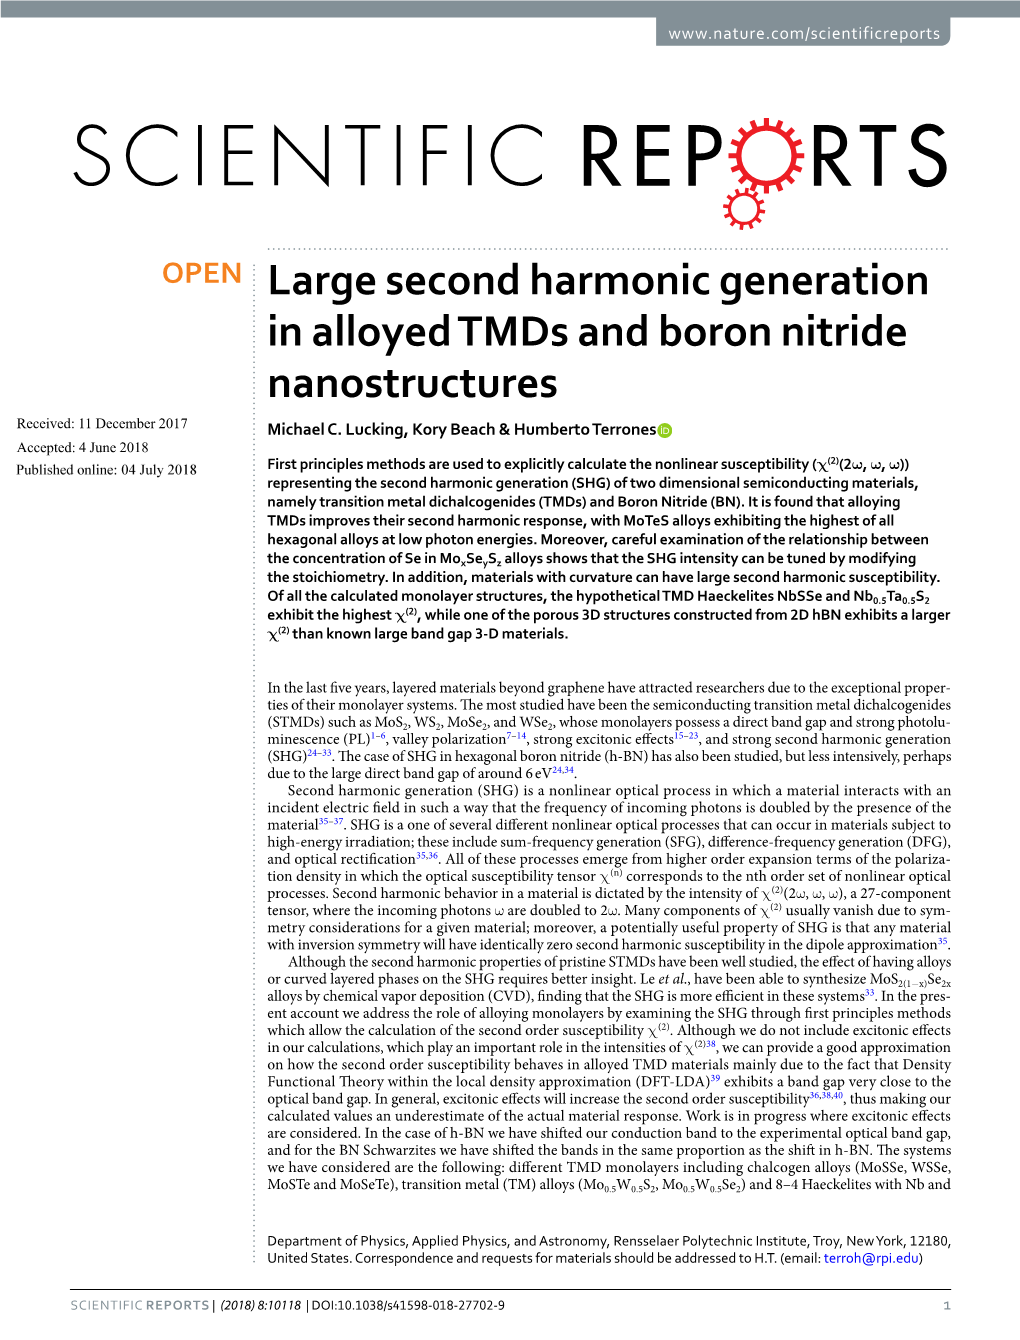 Large Second Harmonic Generation in Alloyed Tmds and Boron Nitride Nanostructures Received: 11 December 2017 Michael C